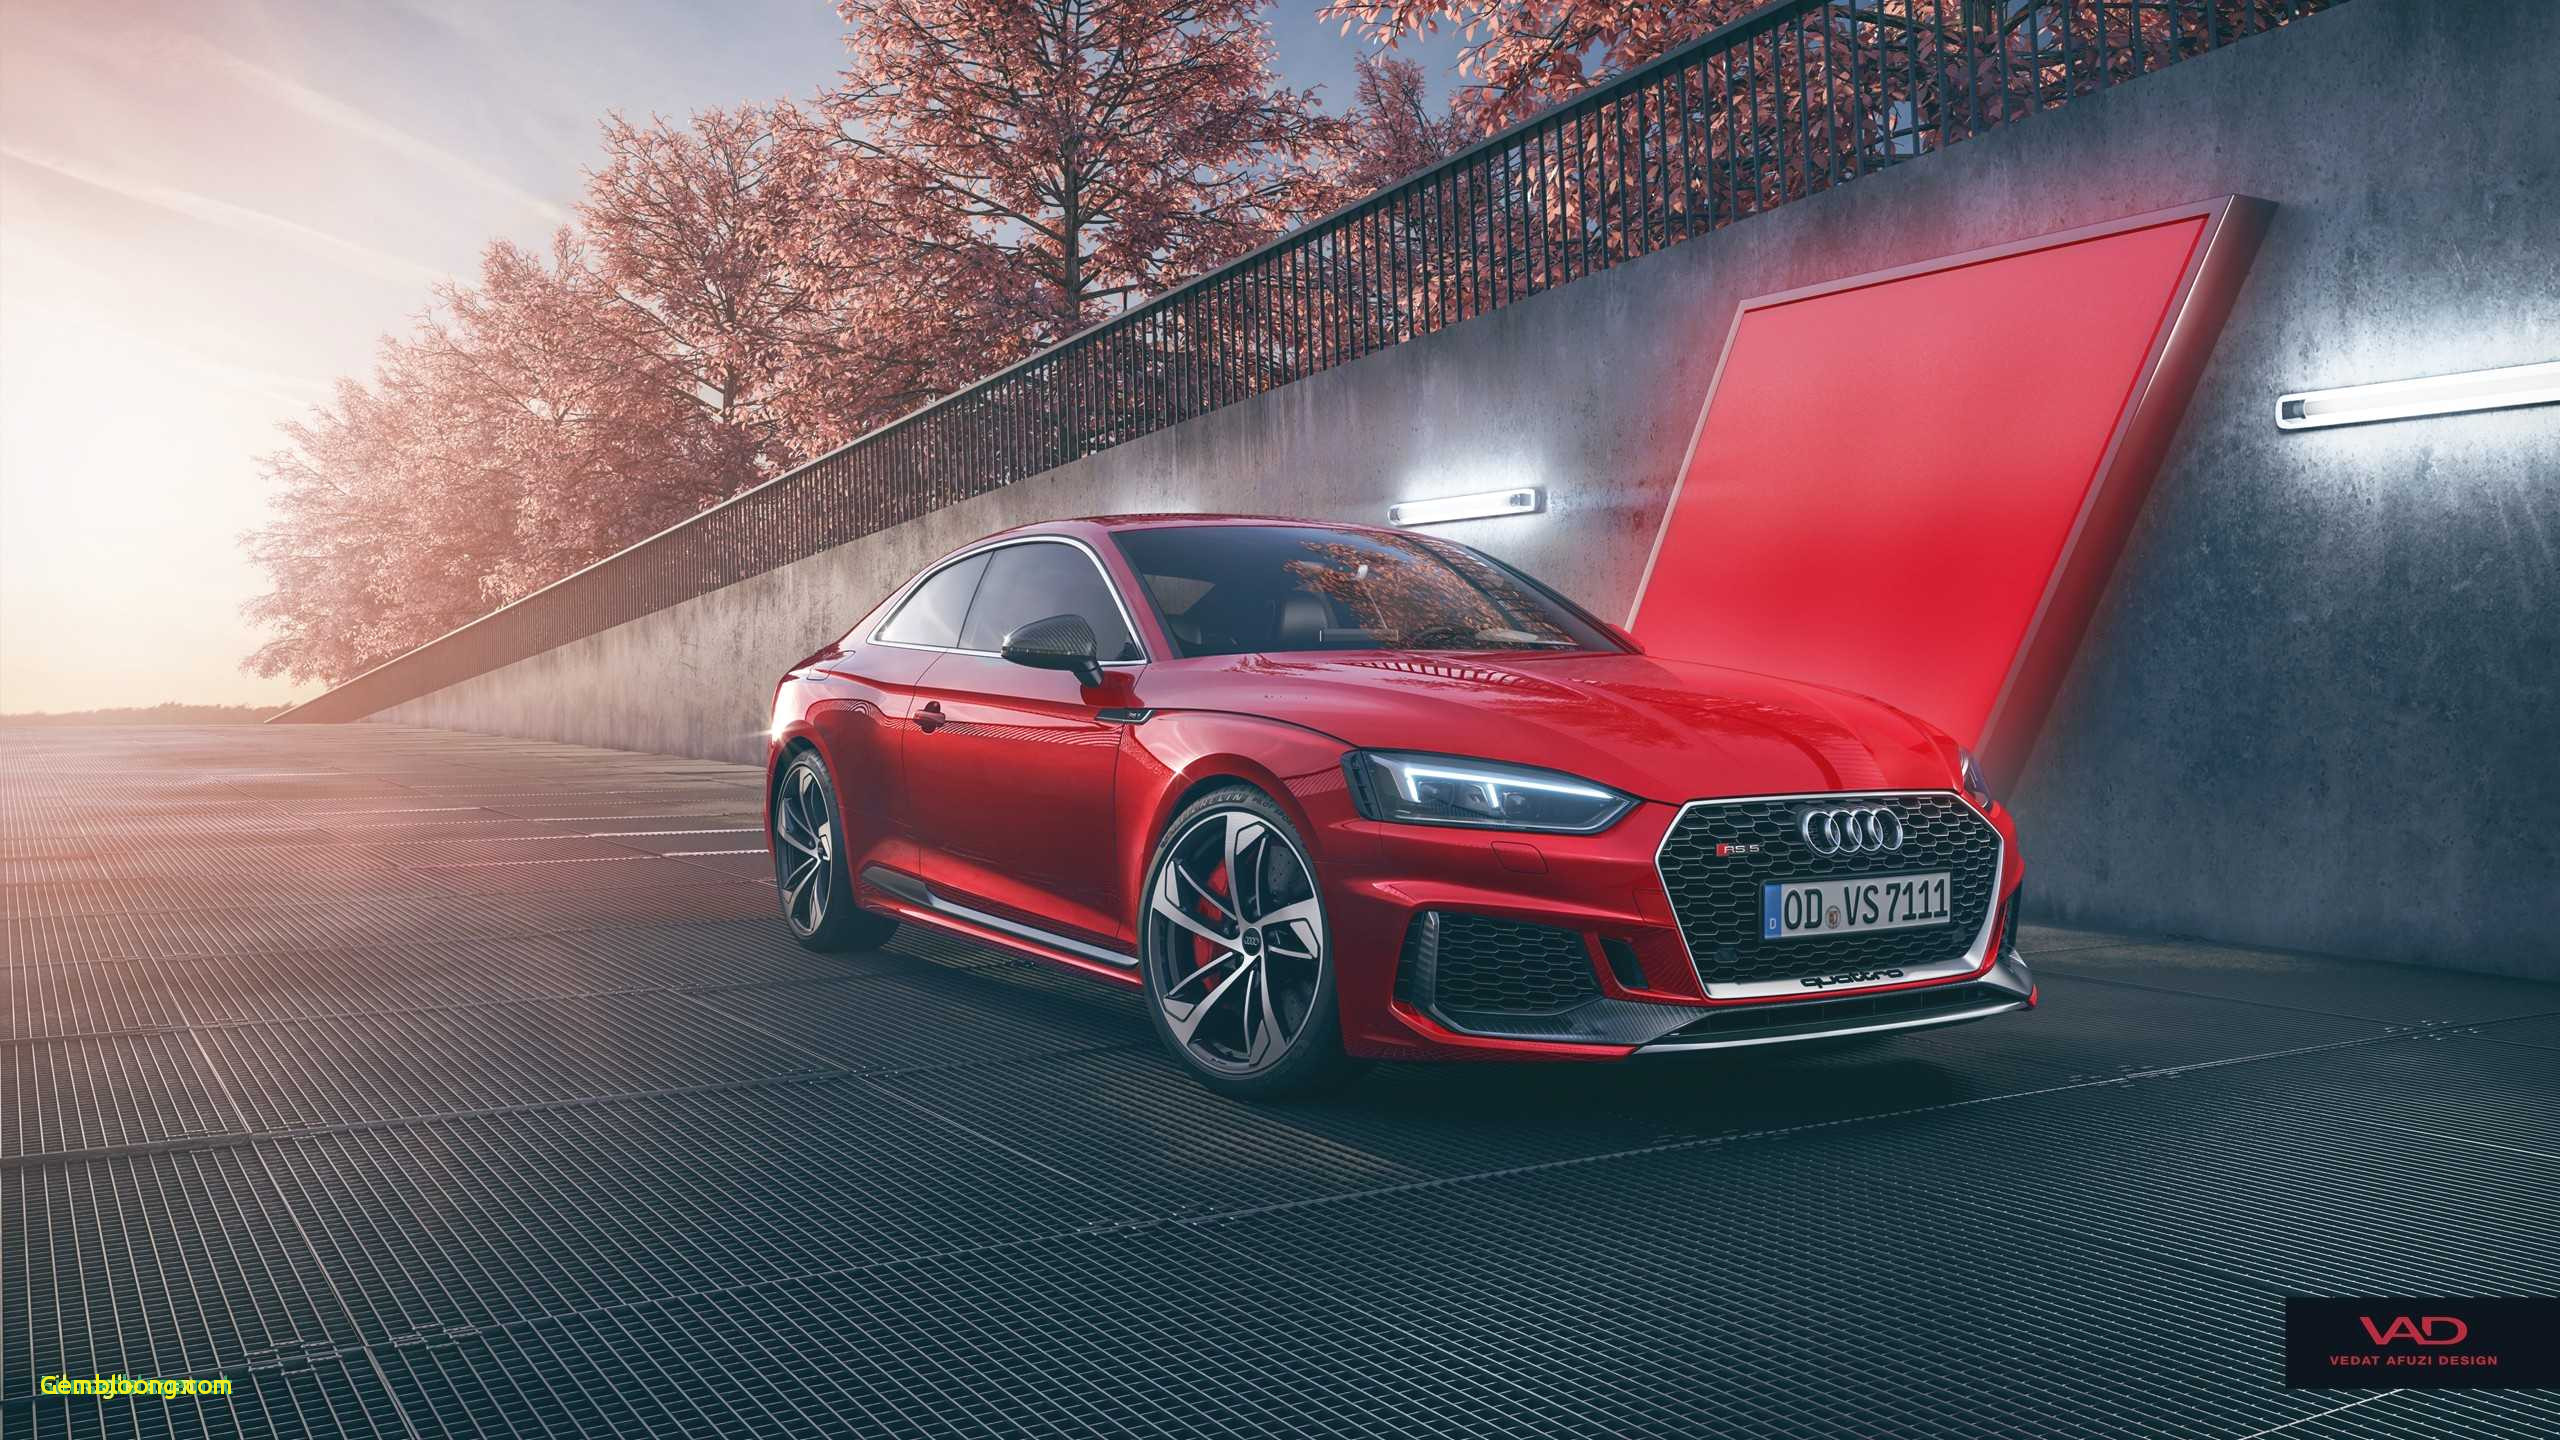 Car And Wallpapers Beautiful Car Wallpaper 480 800 - Audi Rs5 Coupe 2019 , HD Wallpaper & Backgrounds